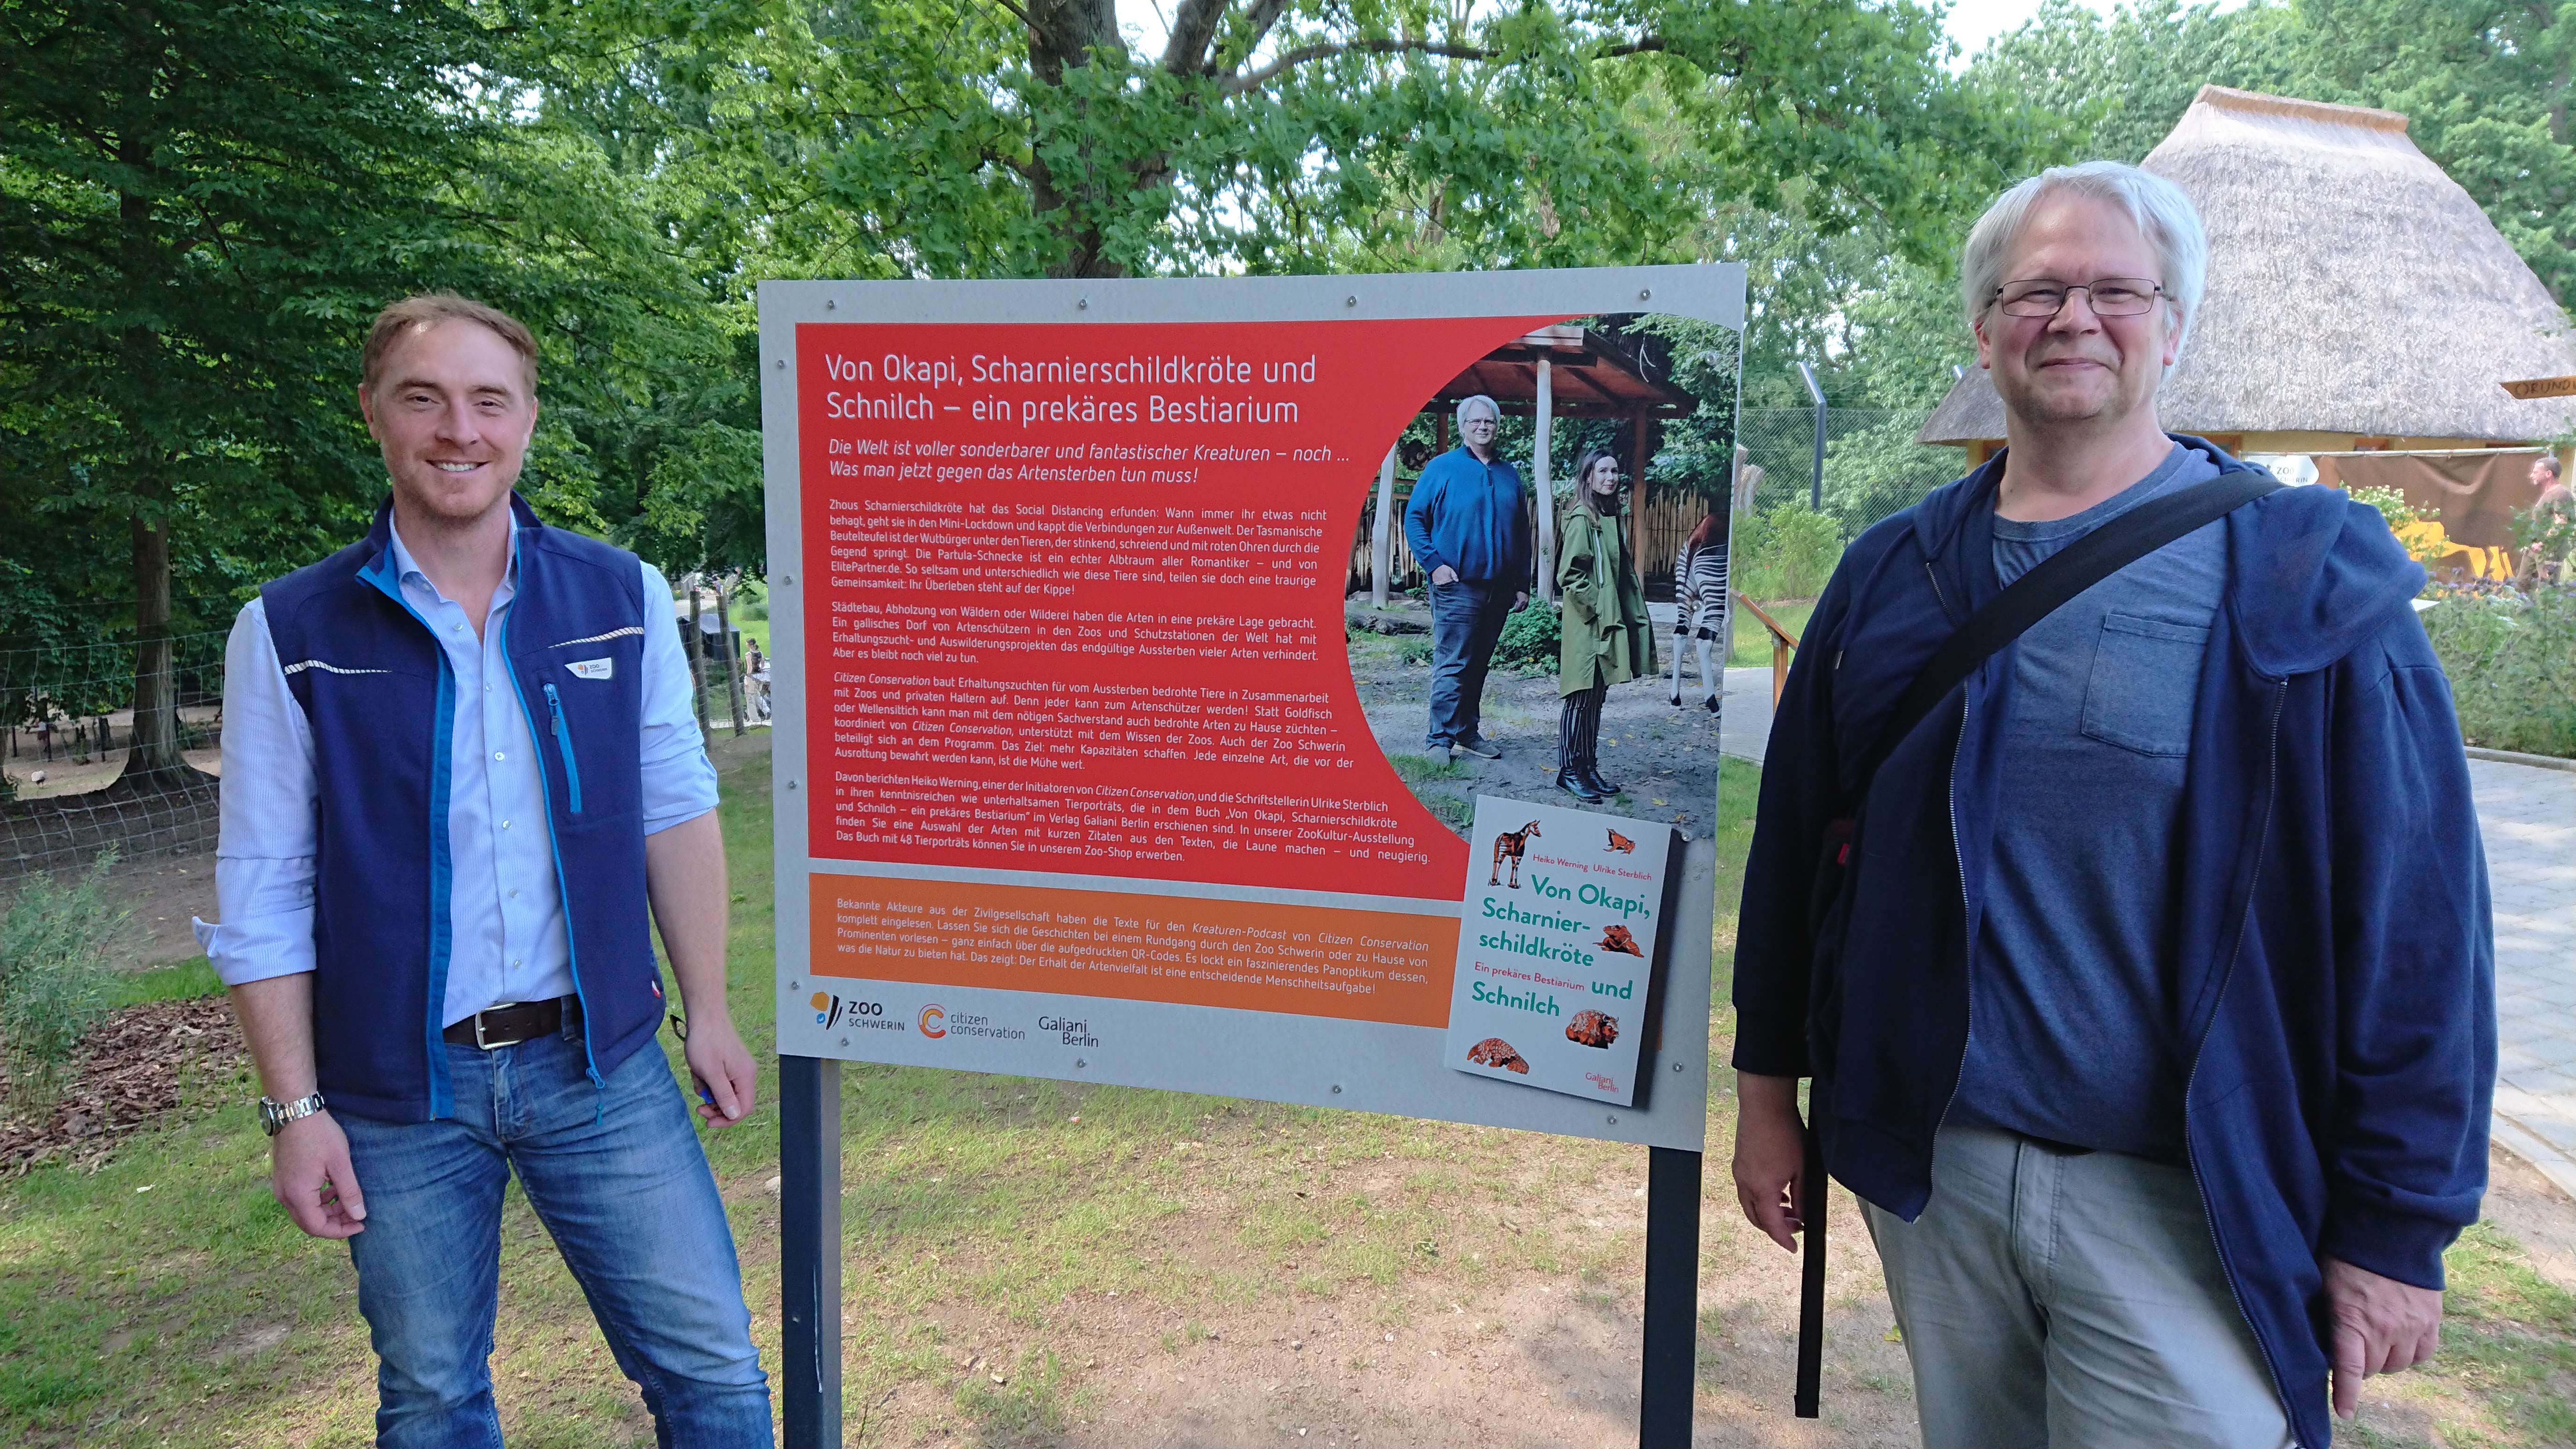 Director Tim Schikora (left) and CC co-founder Heiko Werning in front of the welcome board of the ZooKultur exhibition.